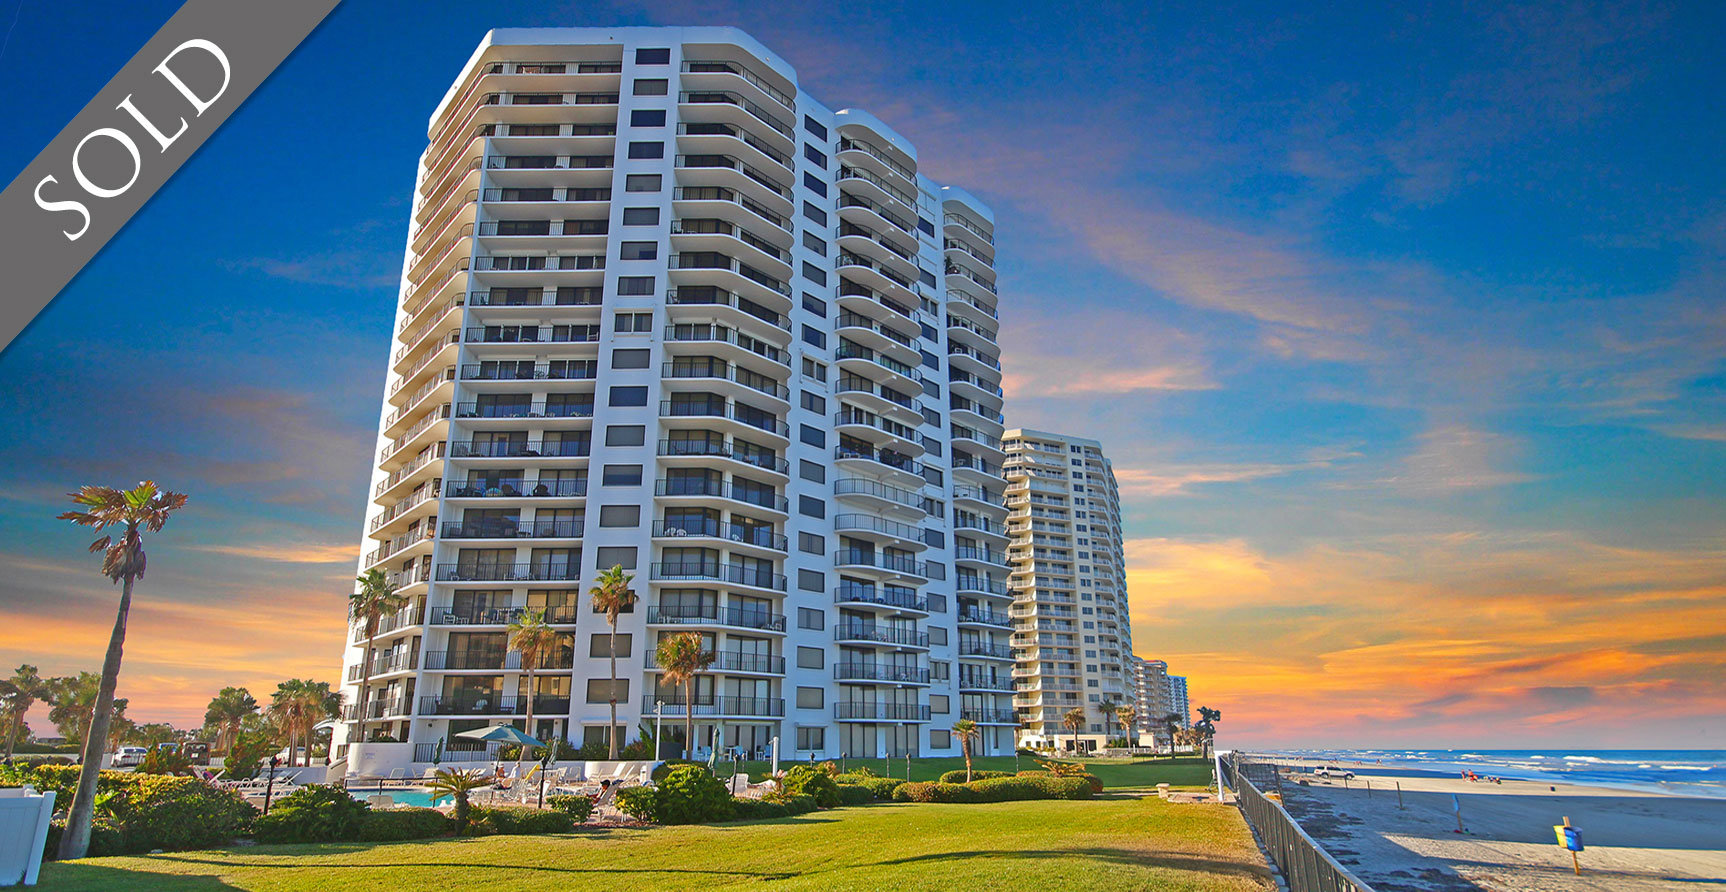 Sherwin oceanfront condos For Sale at 2555 S Atlantic Ave Daytona Beach  Shores is now sold. The LUXE Group 386-299-4043